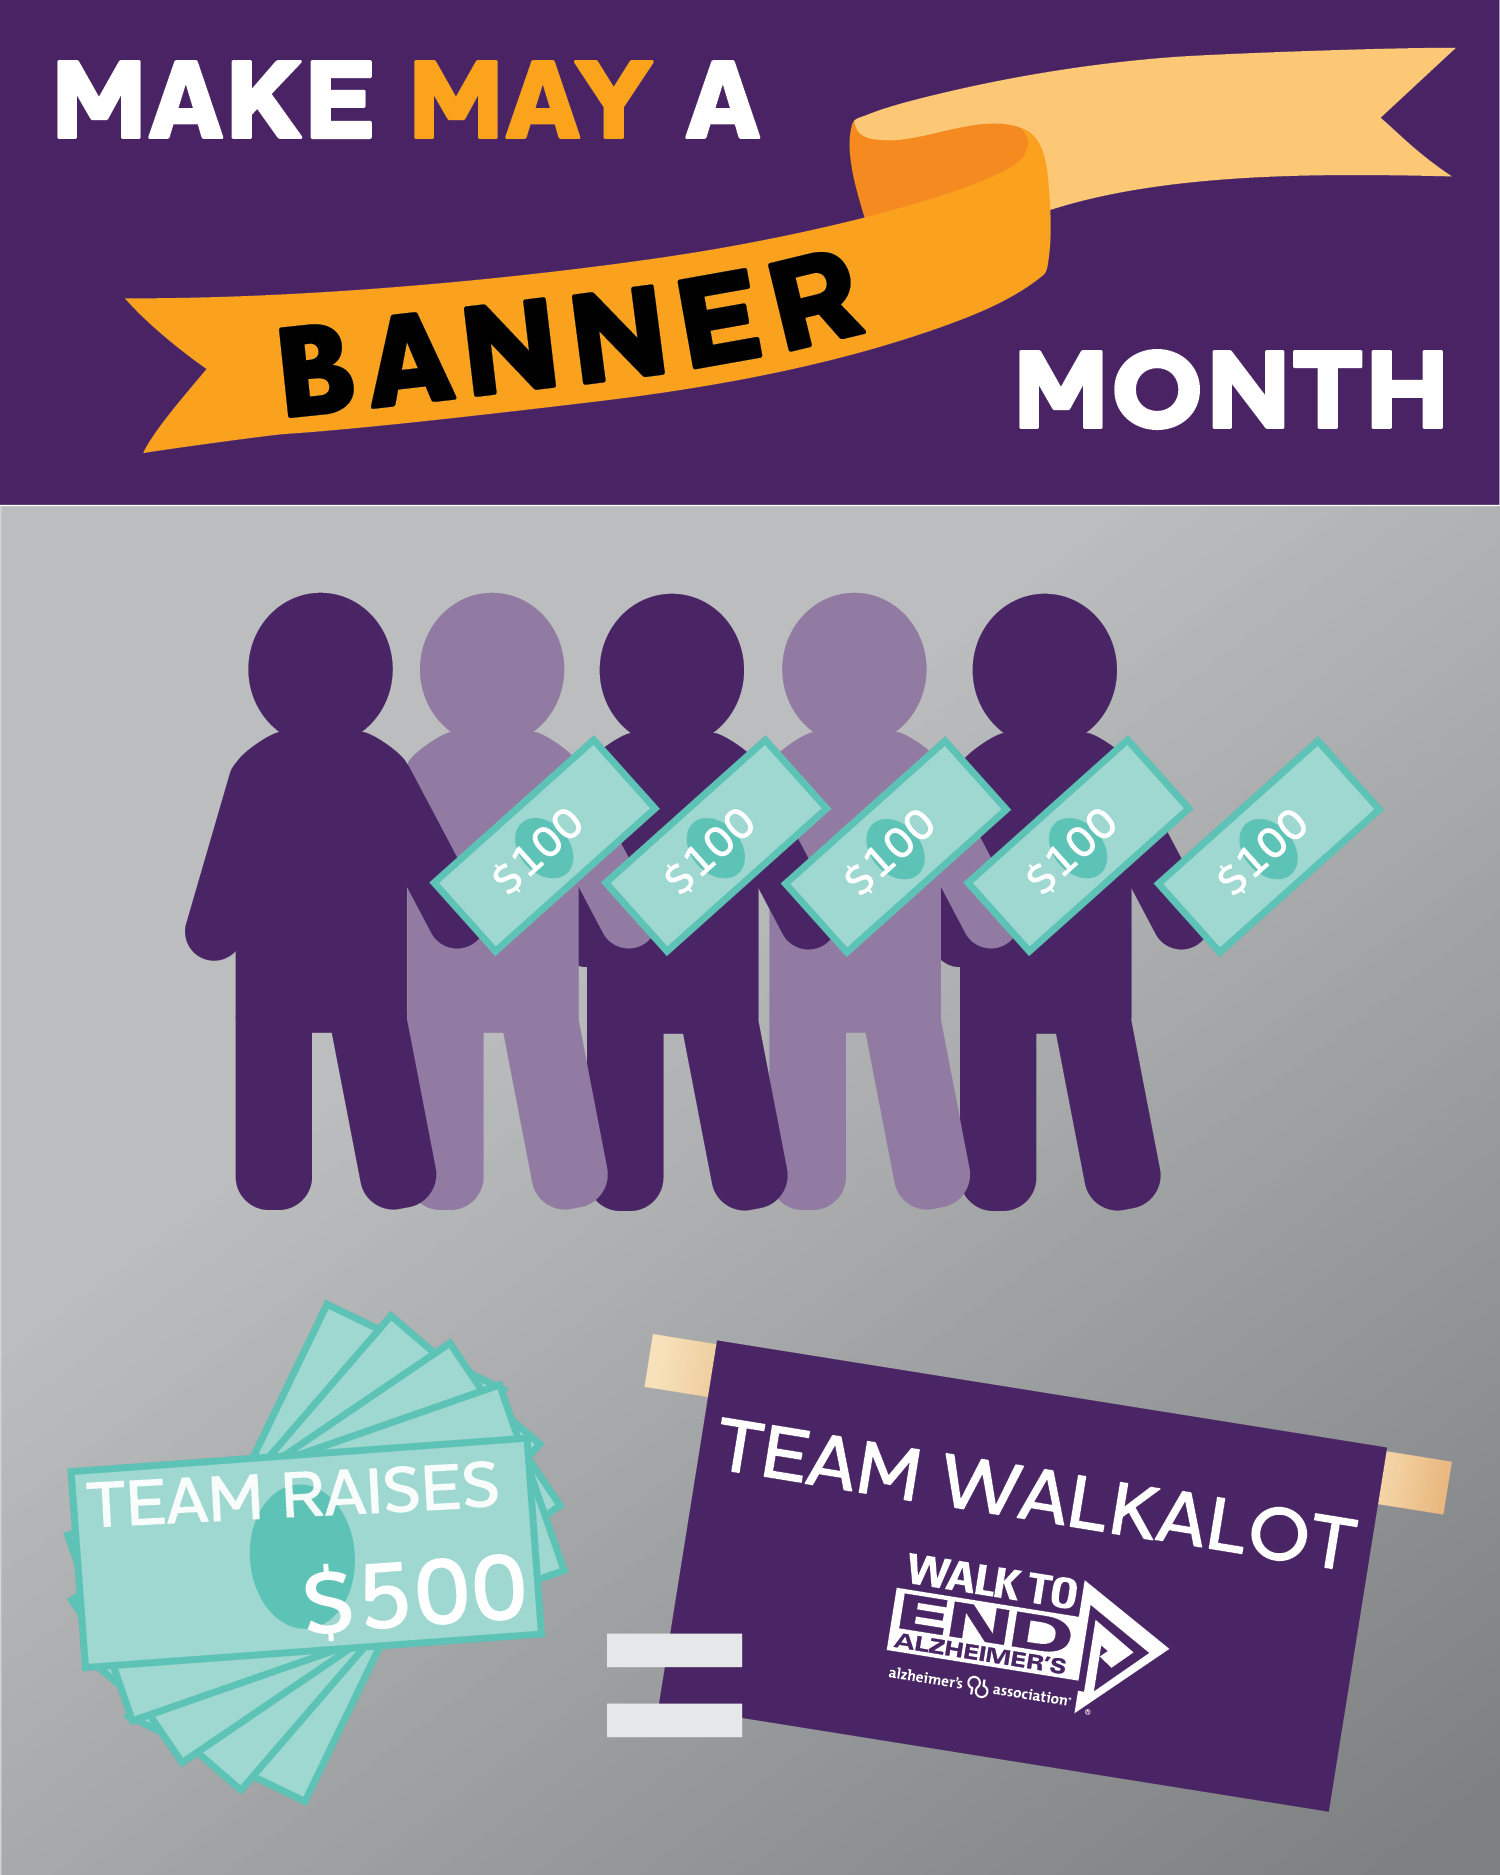 Make May A Banner Month!